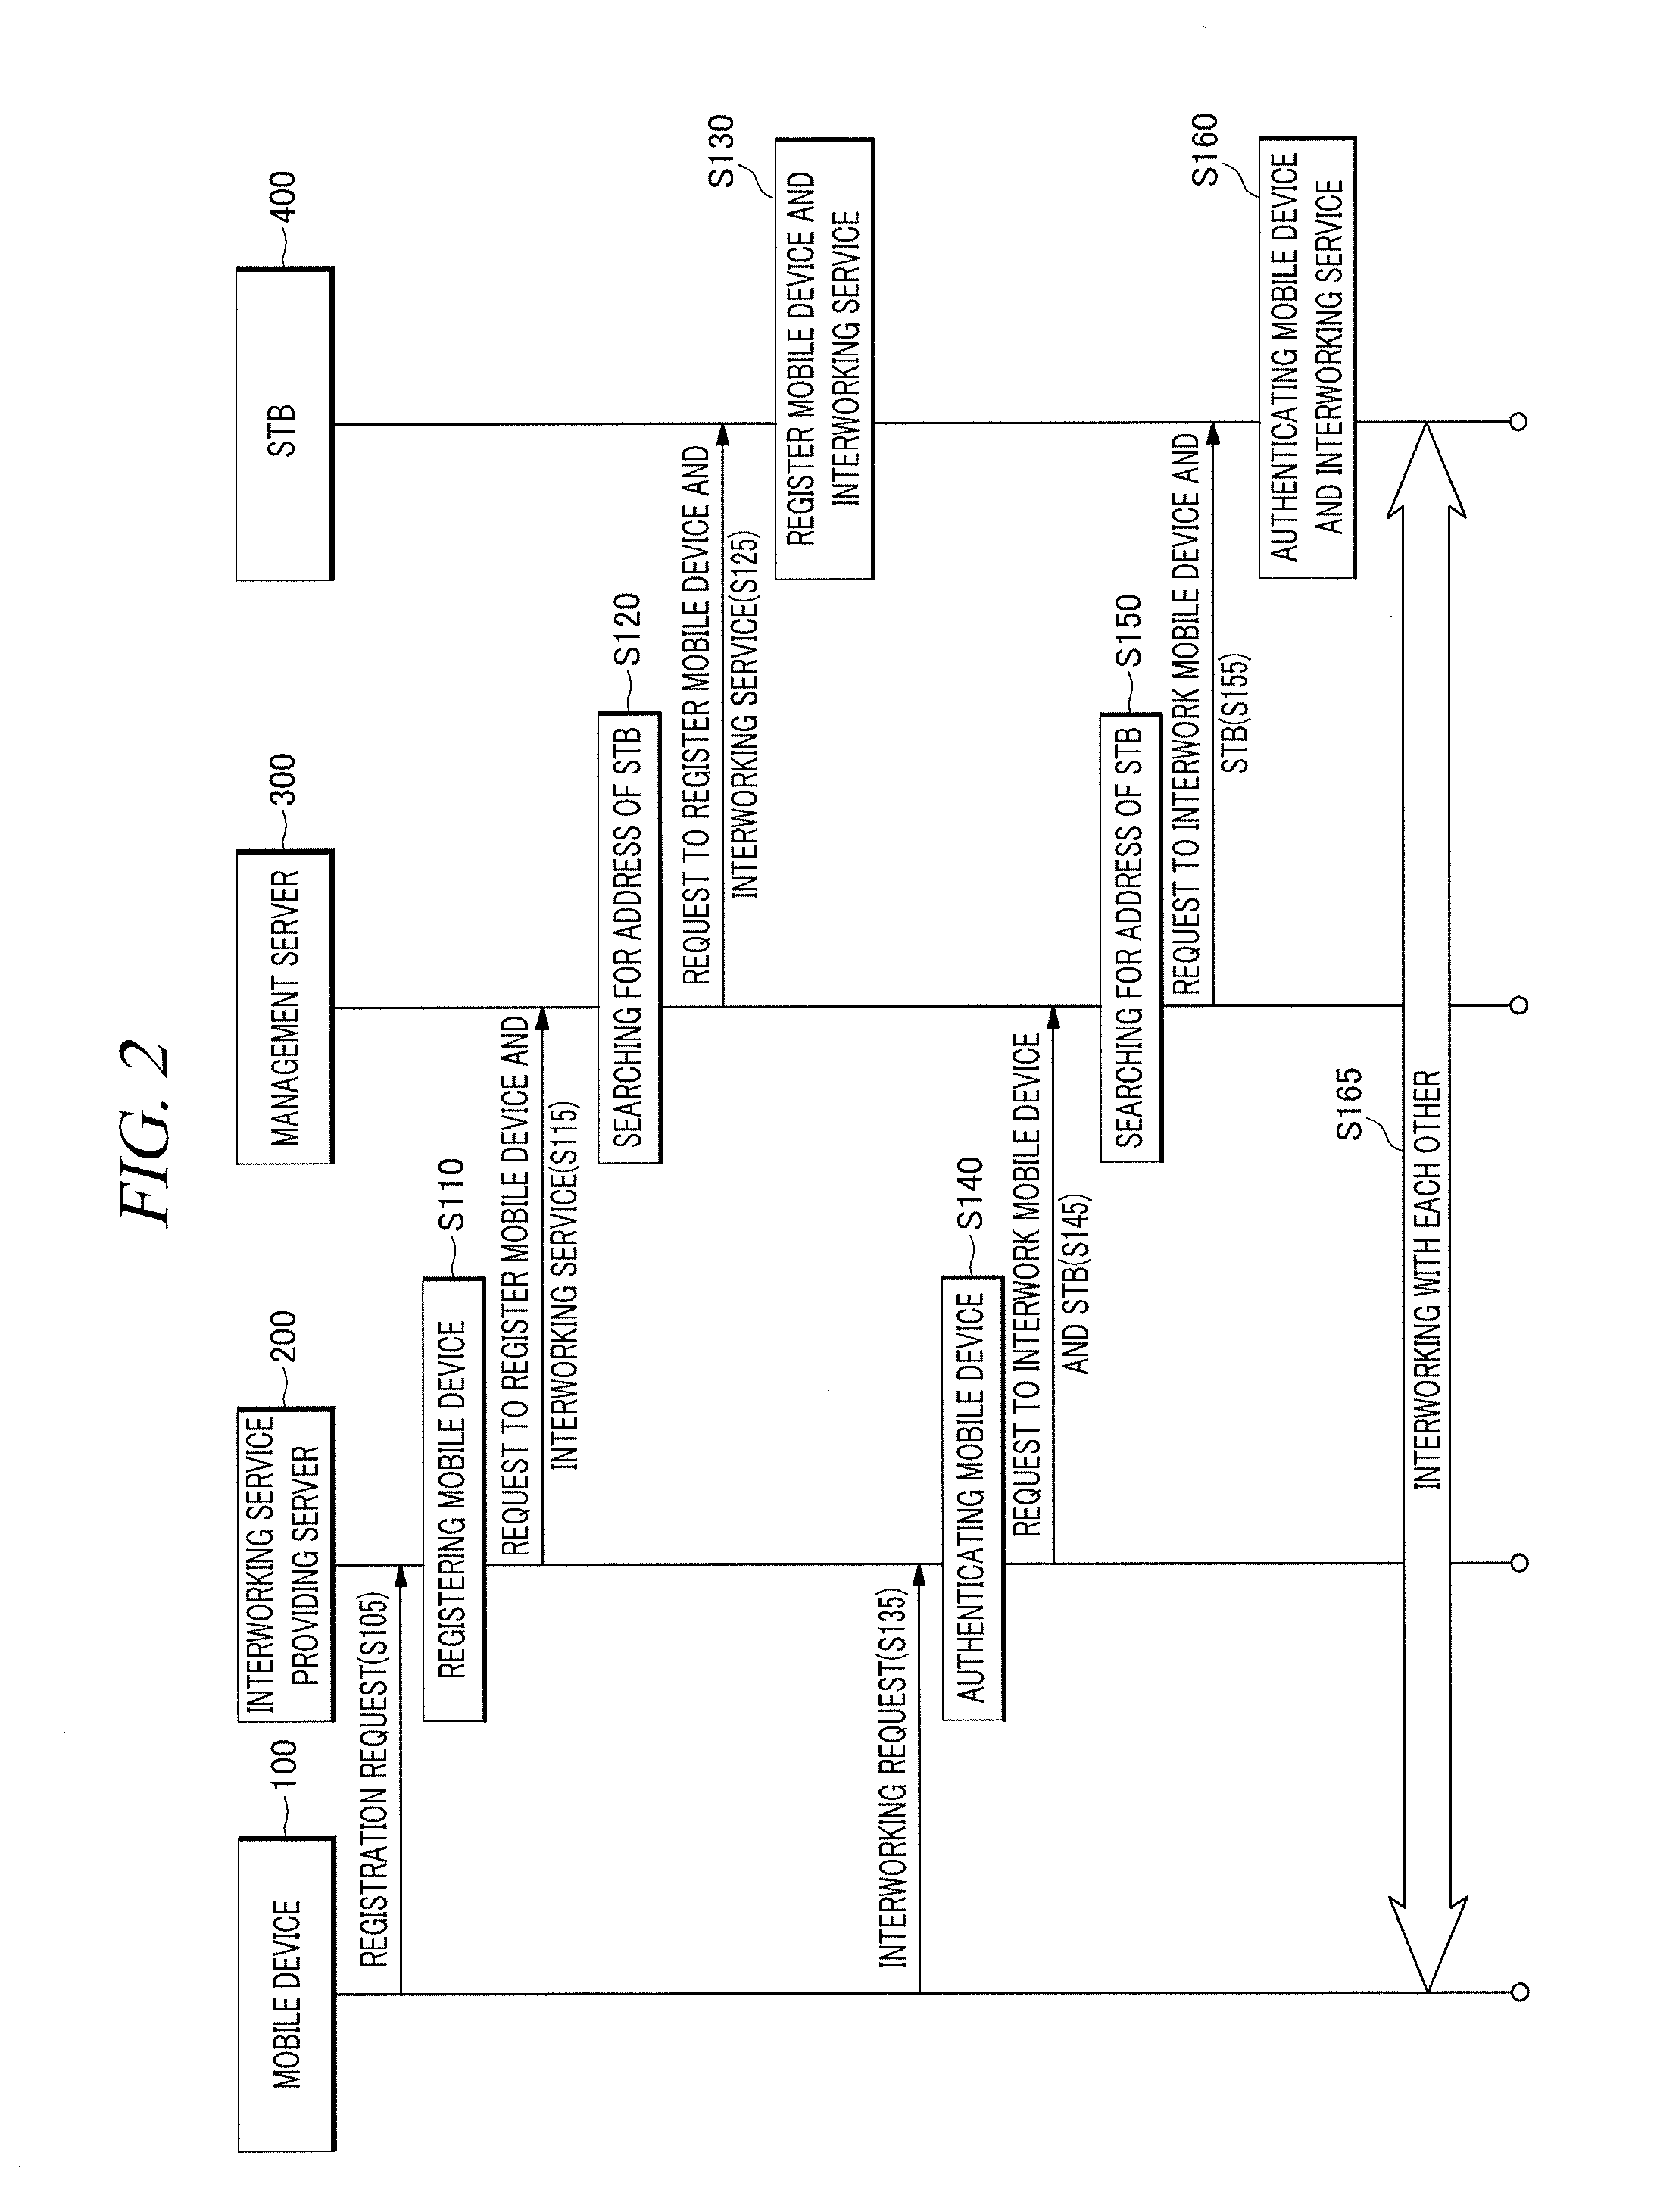 Method and apparatus for interworking devices